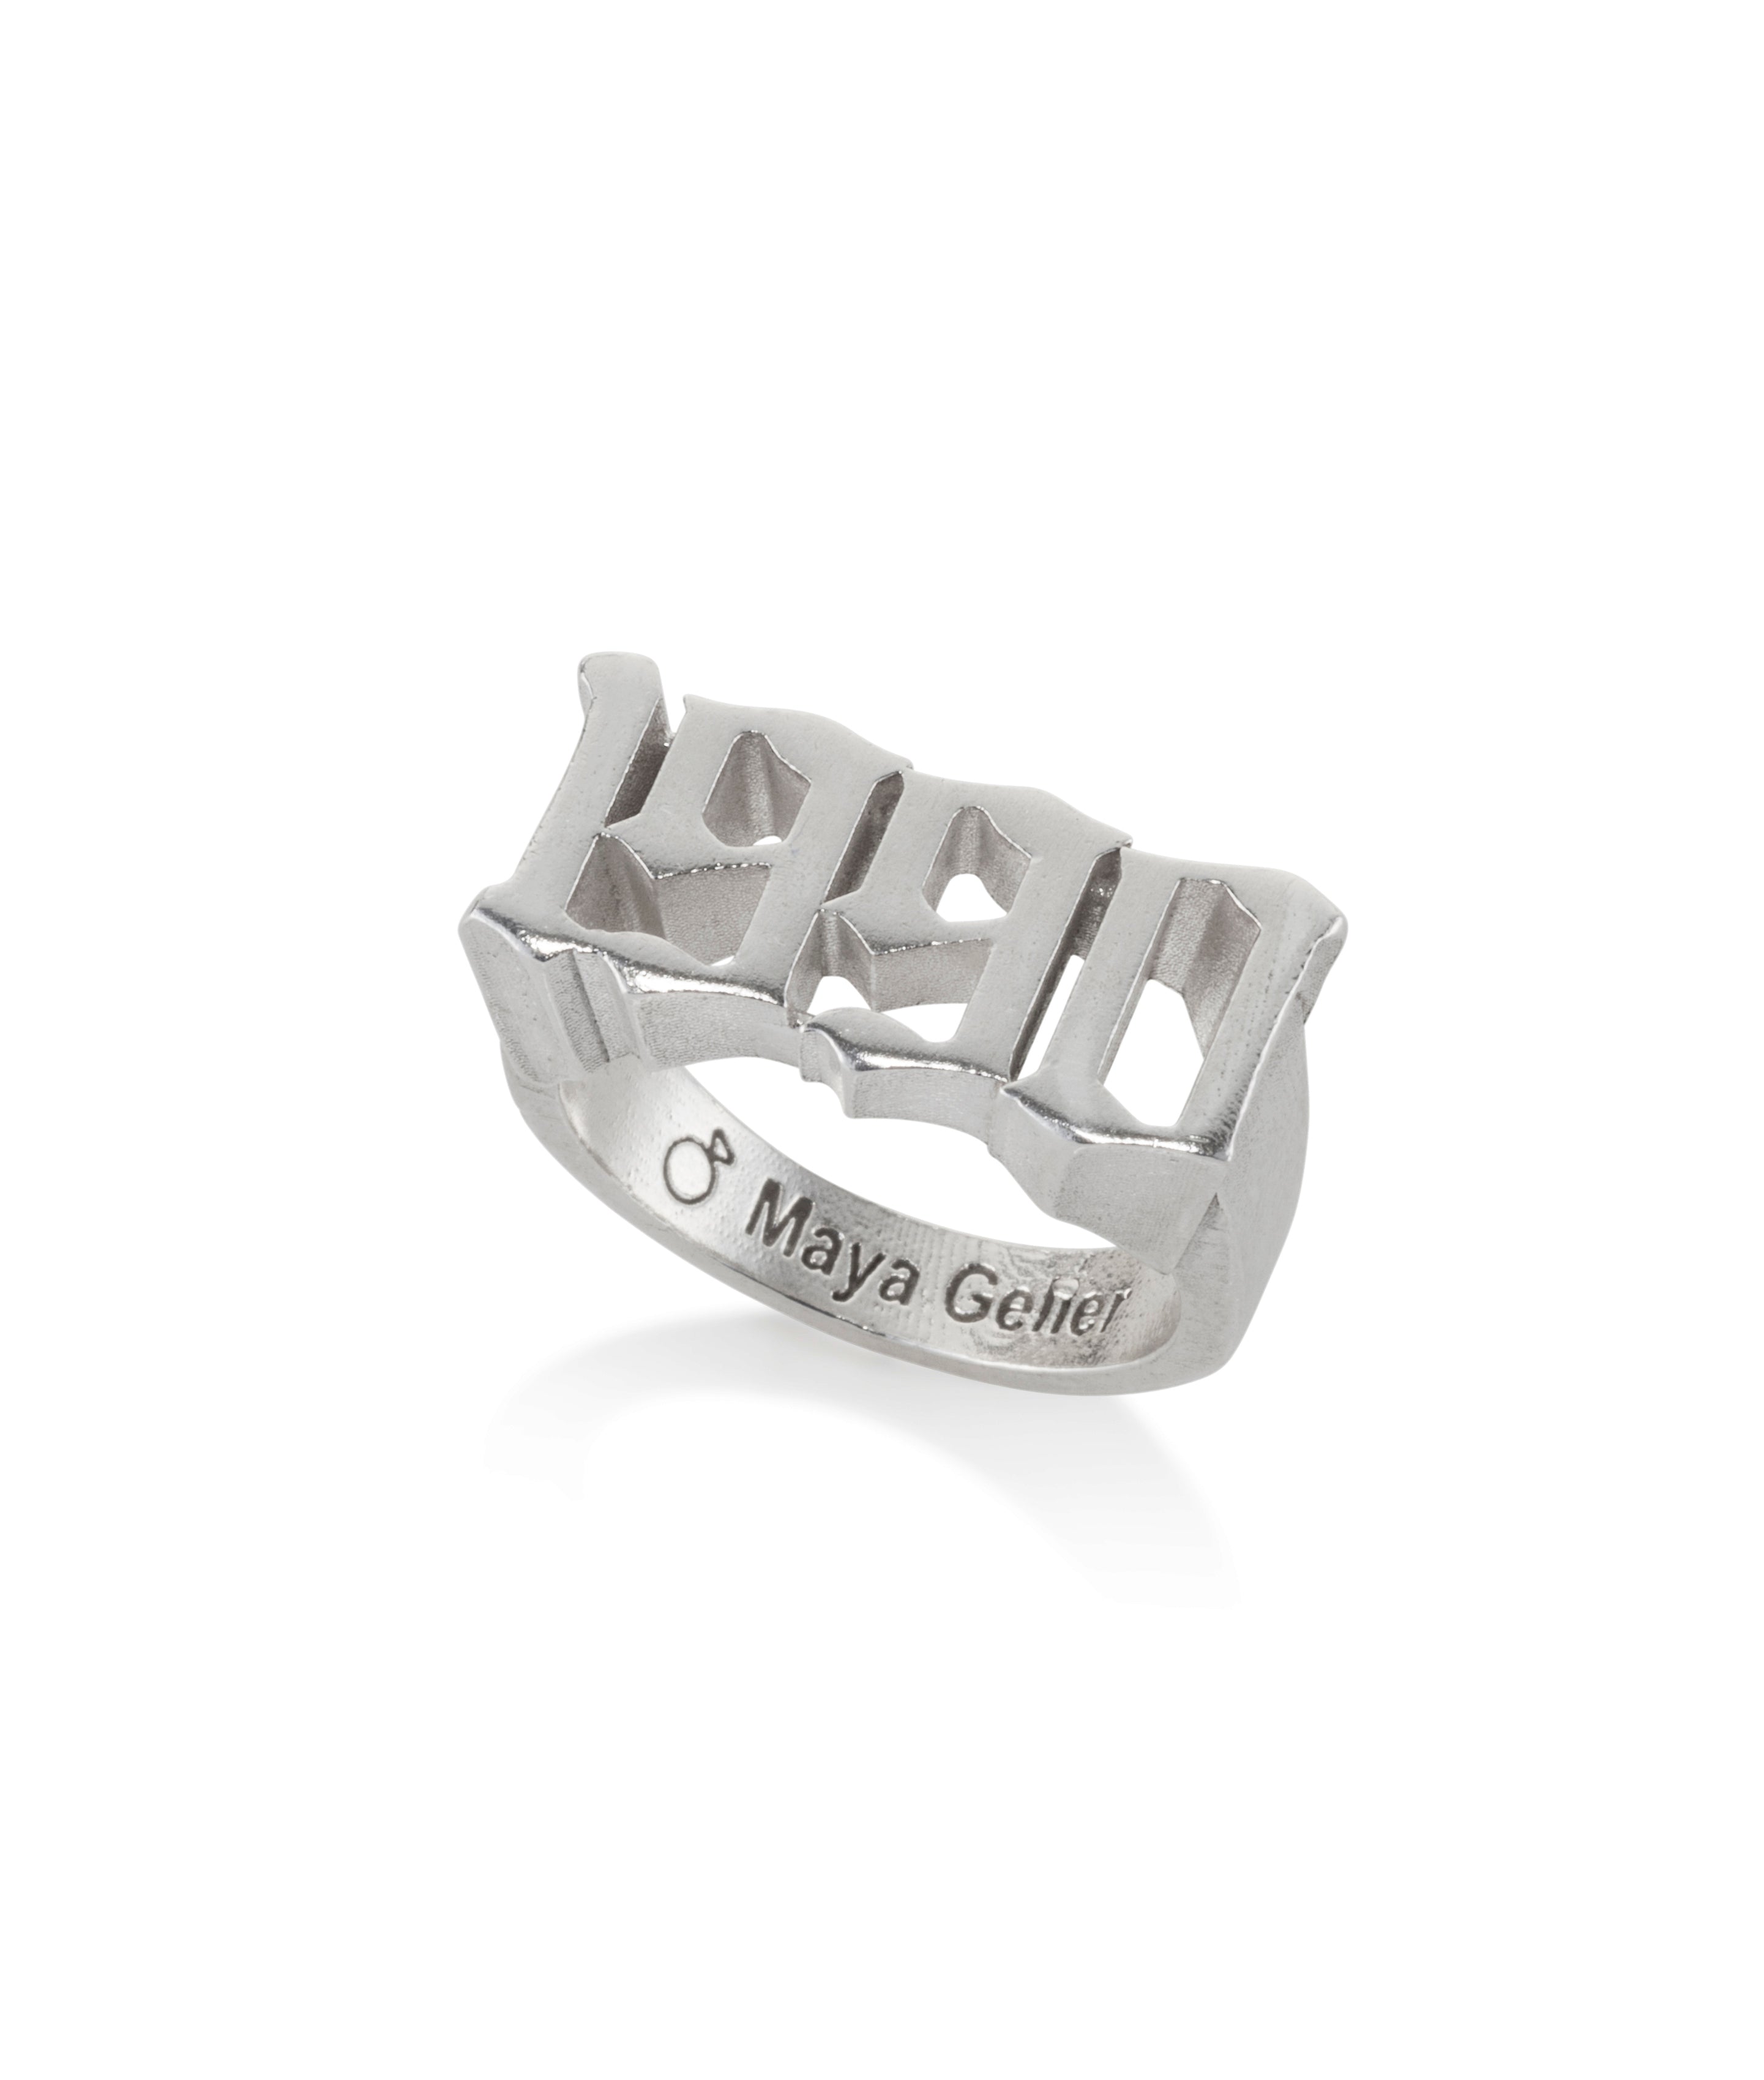 Silver Years ring - choose any year you want